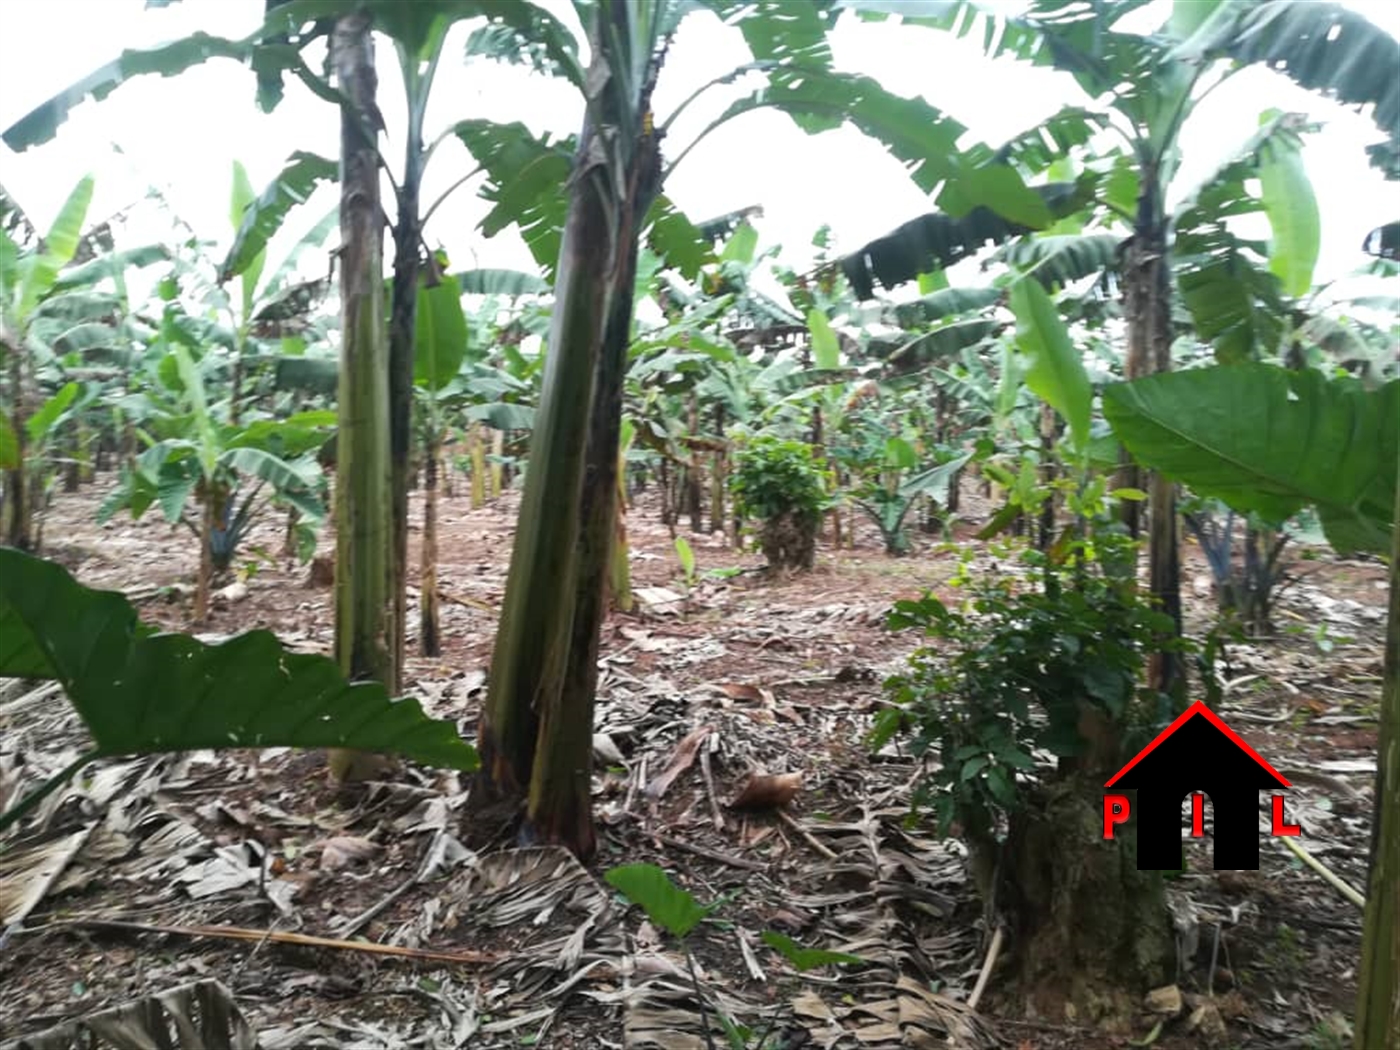 Agricultural Land for sale in Madu Gomba